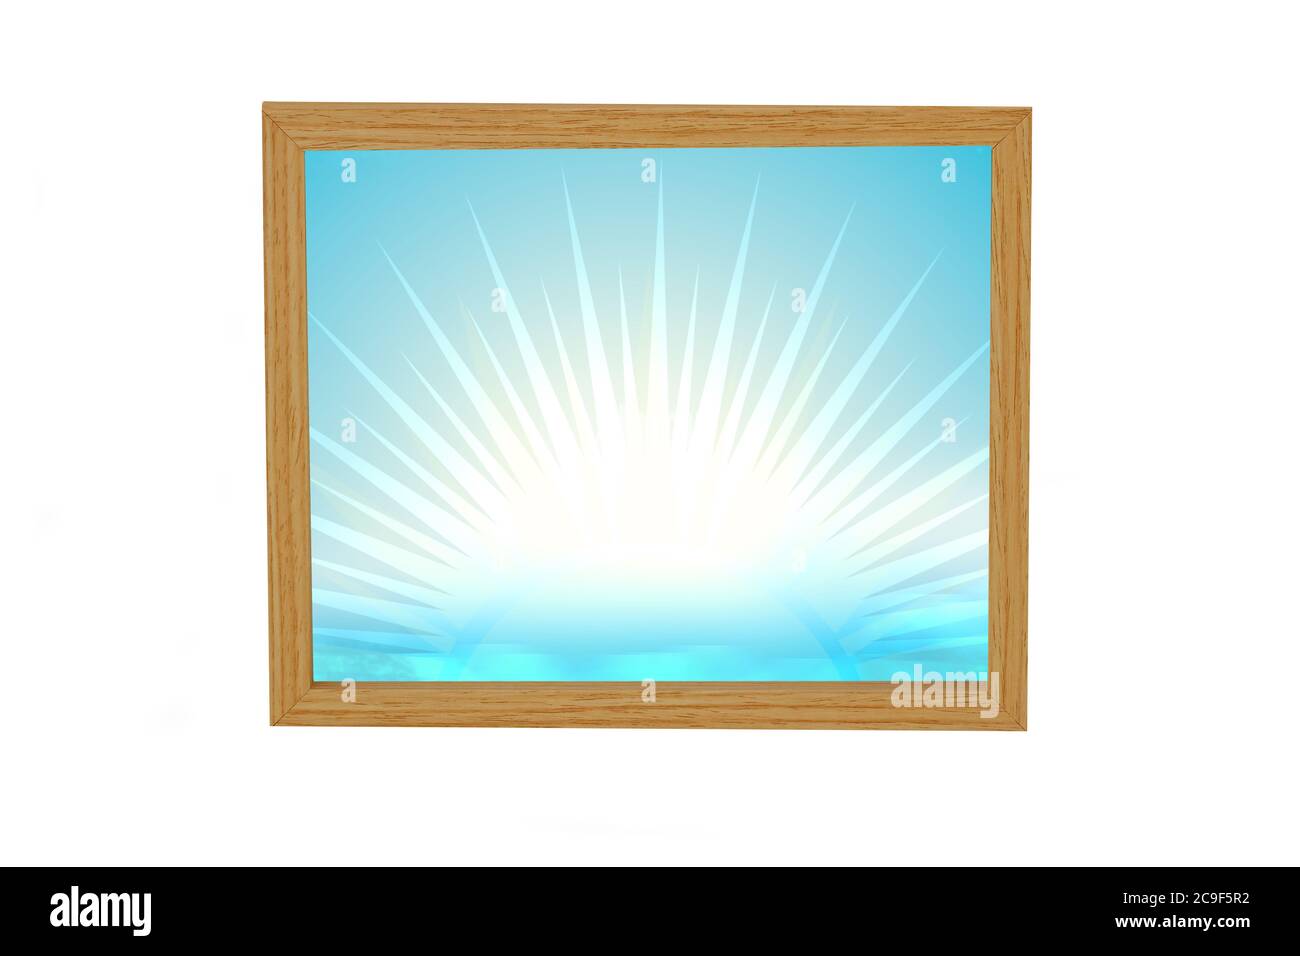 https://c8.alamy.com/comp/2C9F5R2/landscape-wooden-frame-wooden-picture-frame-with-an-abstract-blue-summer-sunshine-and-sky-isolated-on-a-white-background-template-framing-for-modern-2C9F5R2.jpg